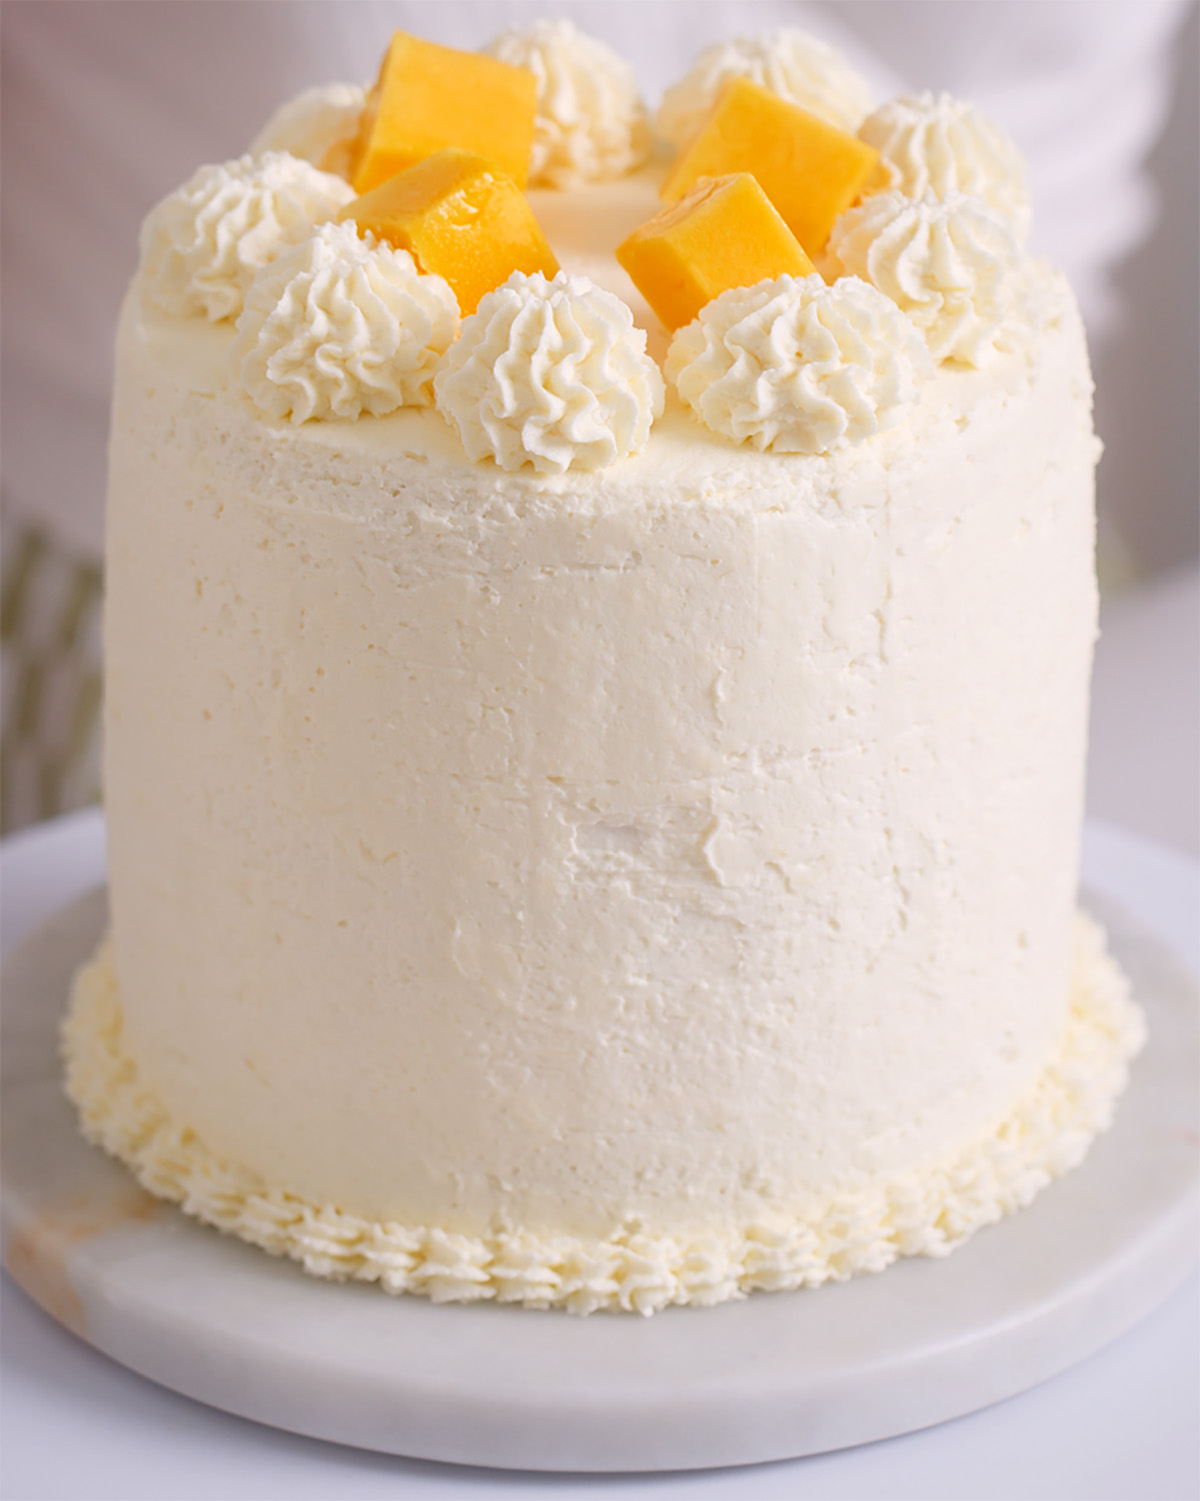 Decorating a mango cake with whipped cream frosting.